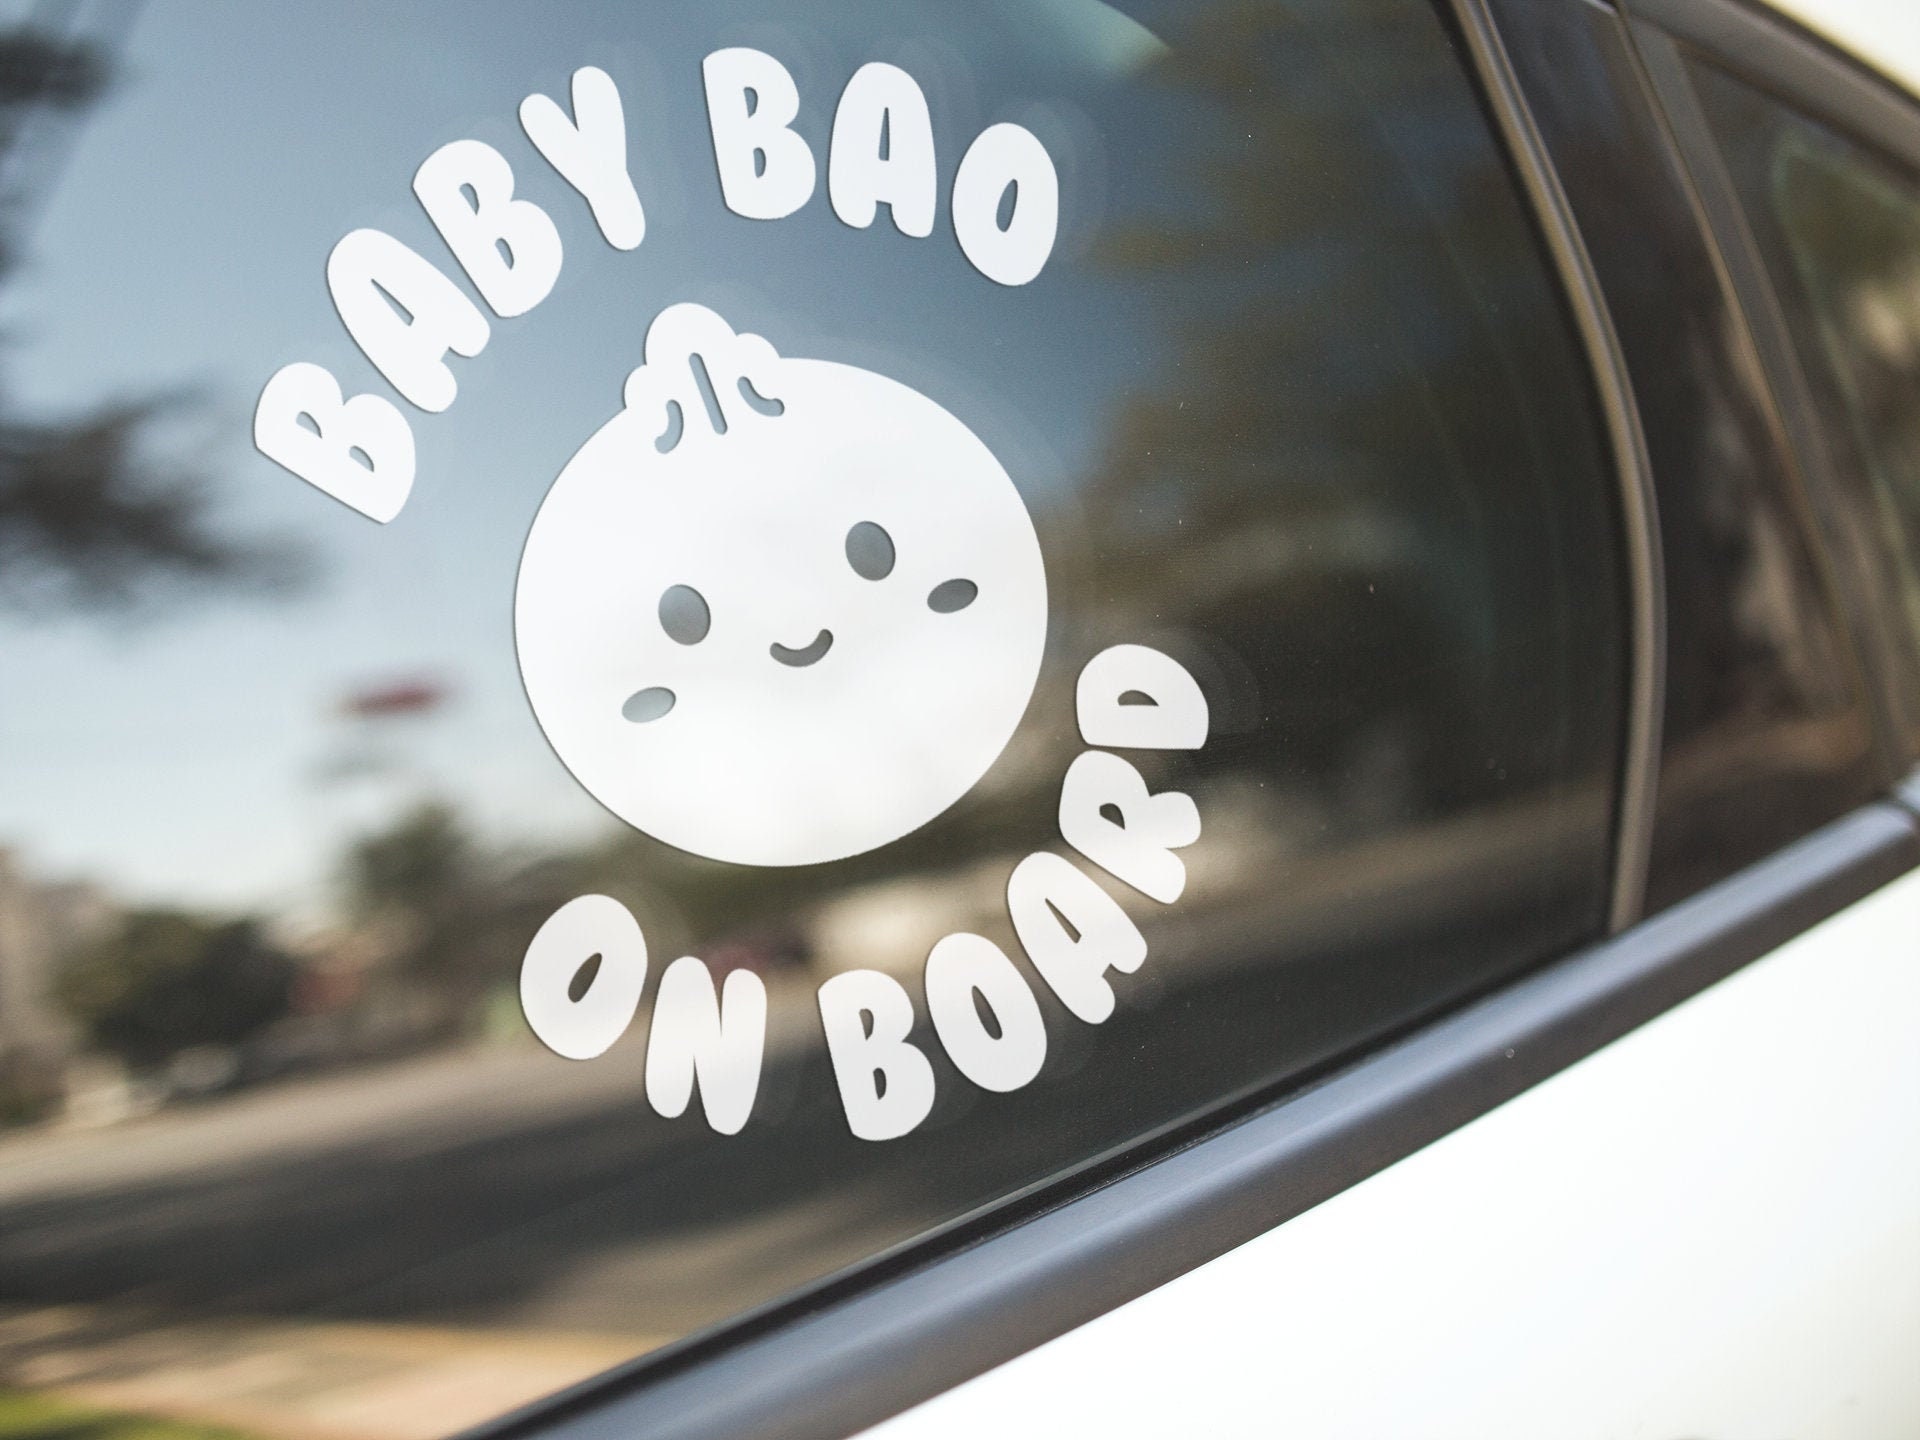 Car Window Decal Baby Shower Gift Easy to Apply and Removable Safety Sticker Decal {Little Lady On Board} Vinyl Decal Baby on Board Decal Pregnancy 